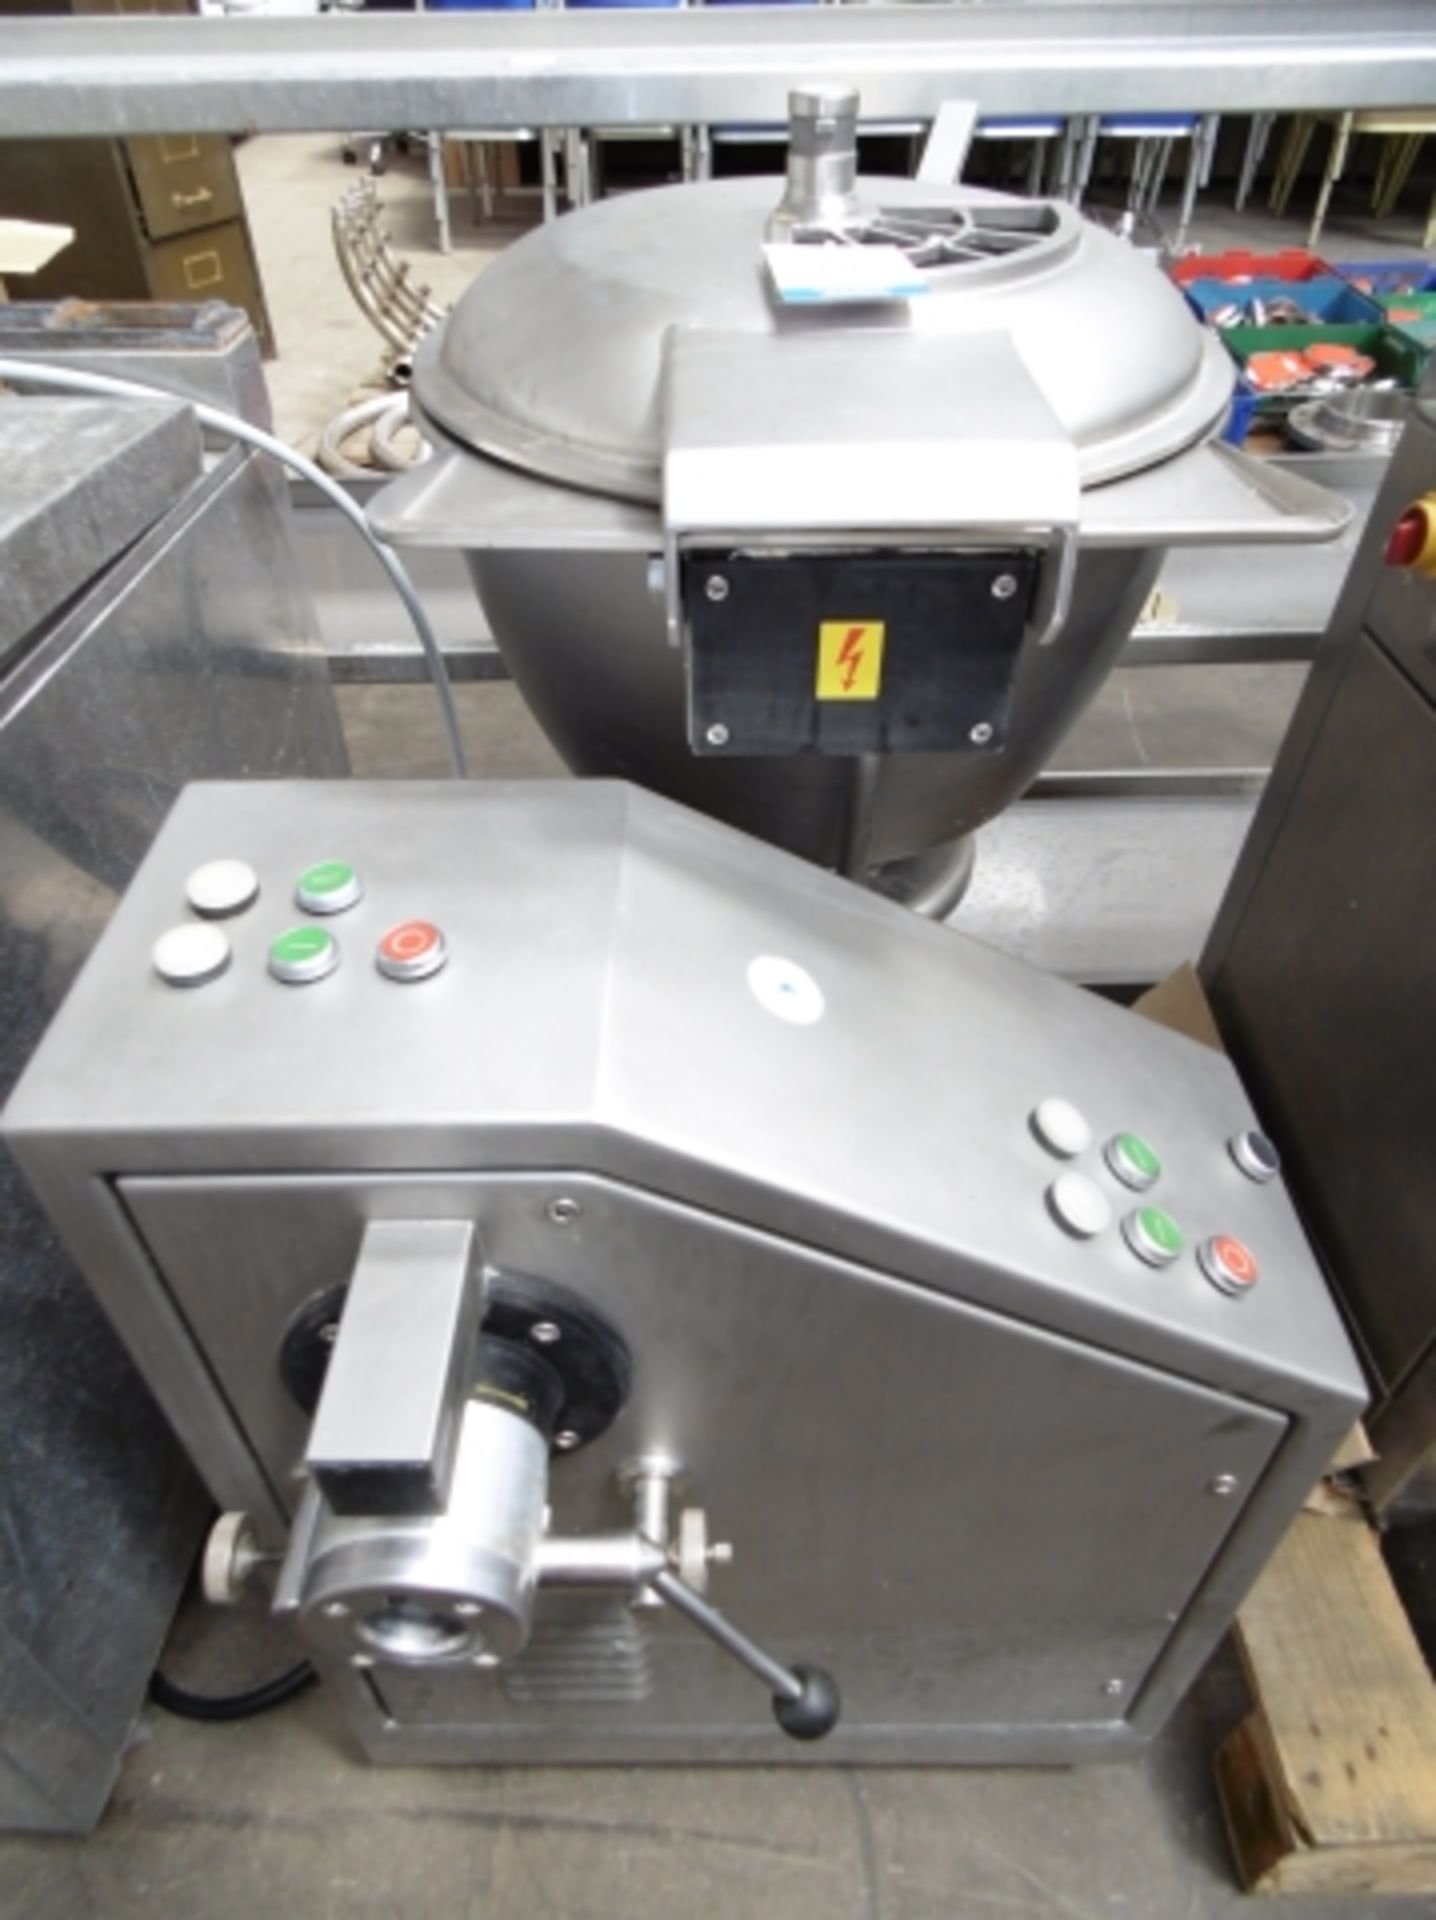 * 1997 Stephan type UM44S Universal Stainless Steel Vertical Cutter Mixer; 3 phase - 400V; serial no - Image 3 of 5